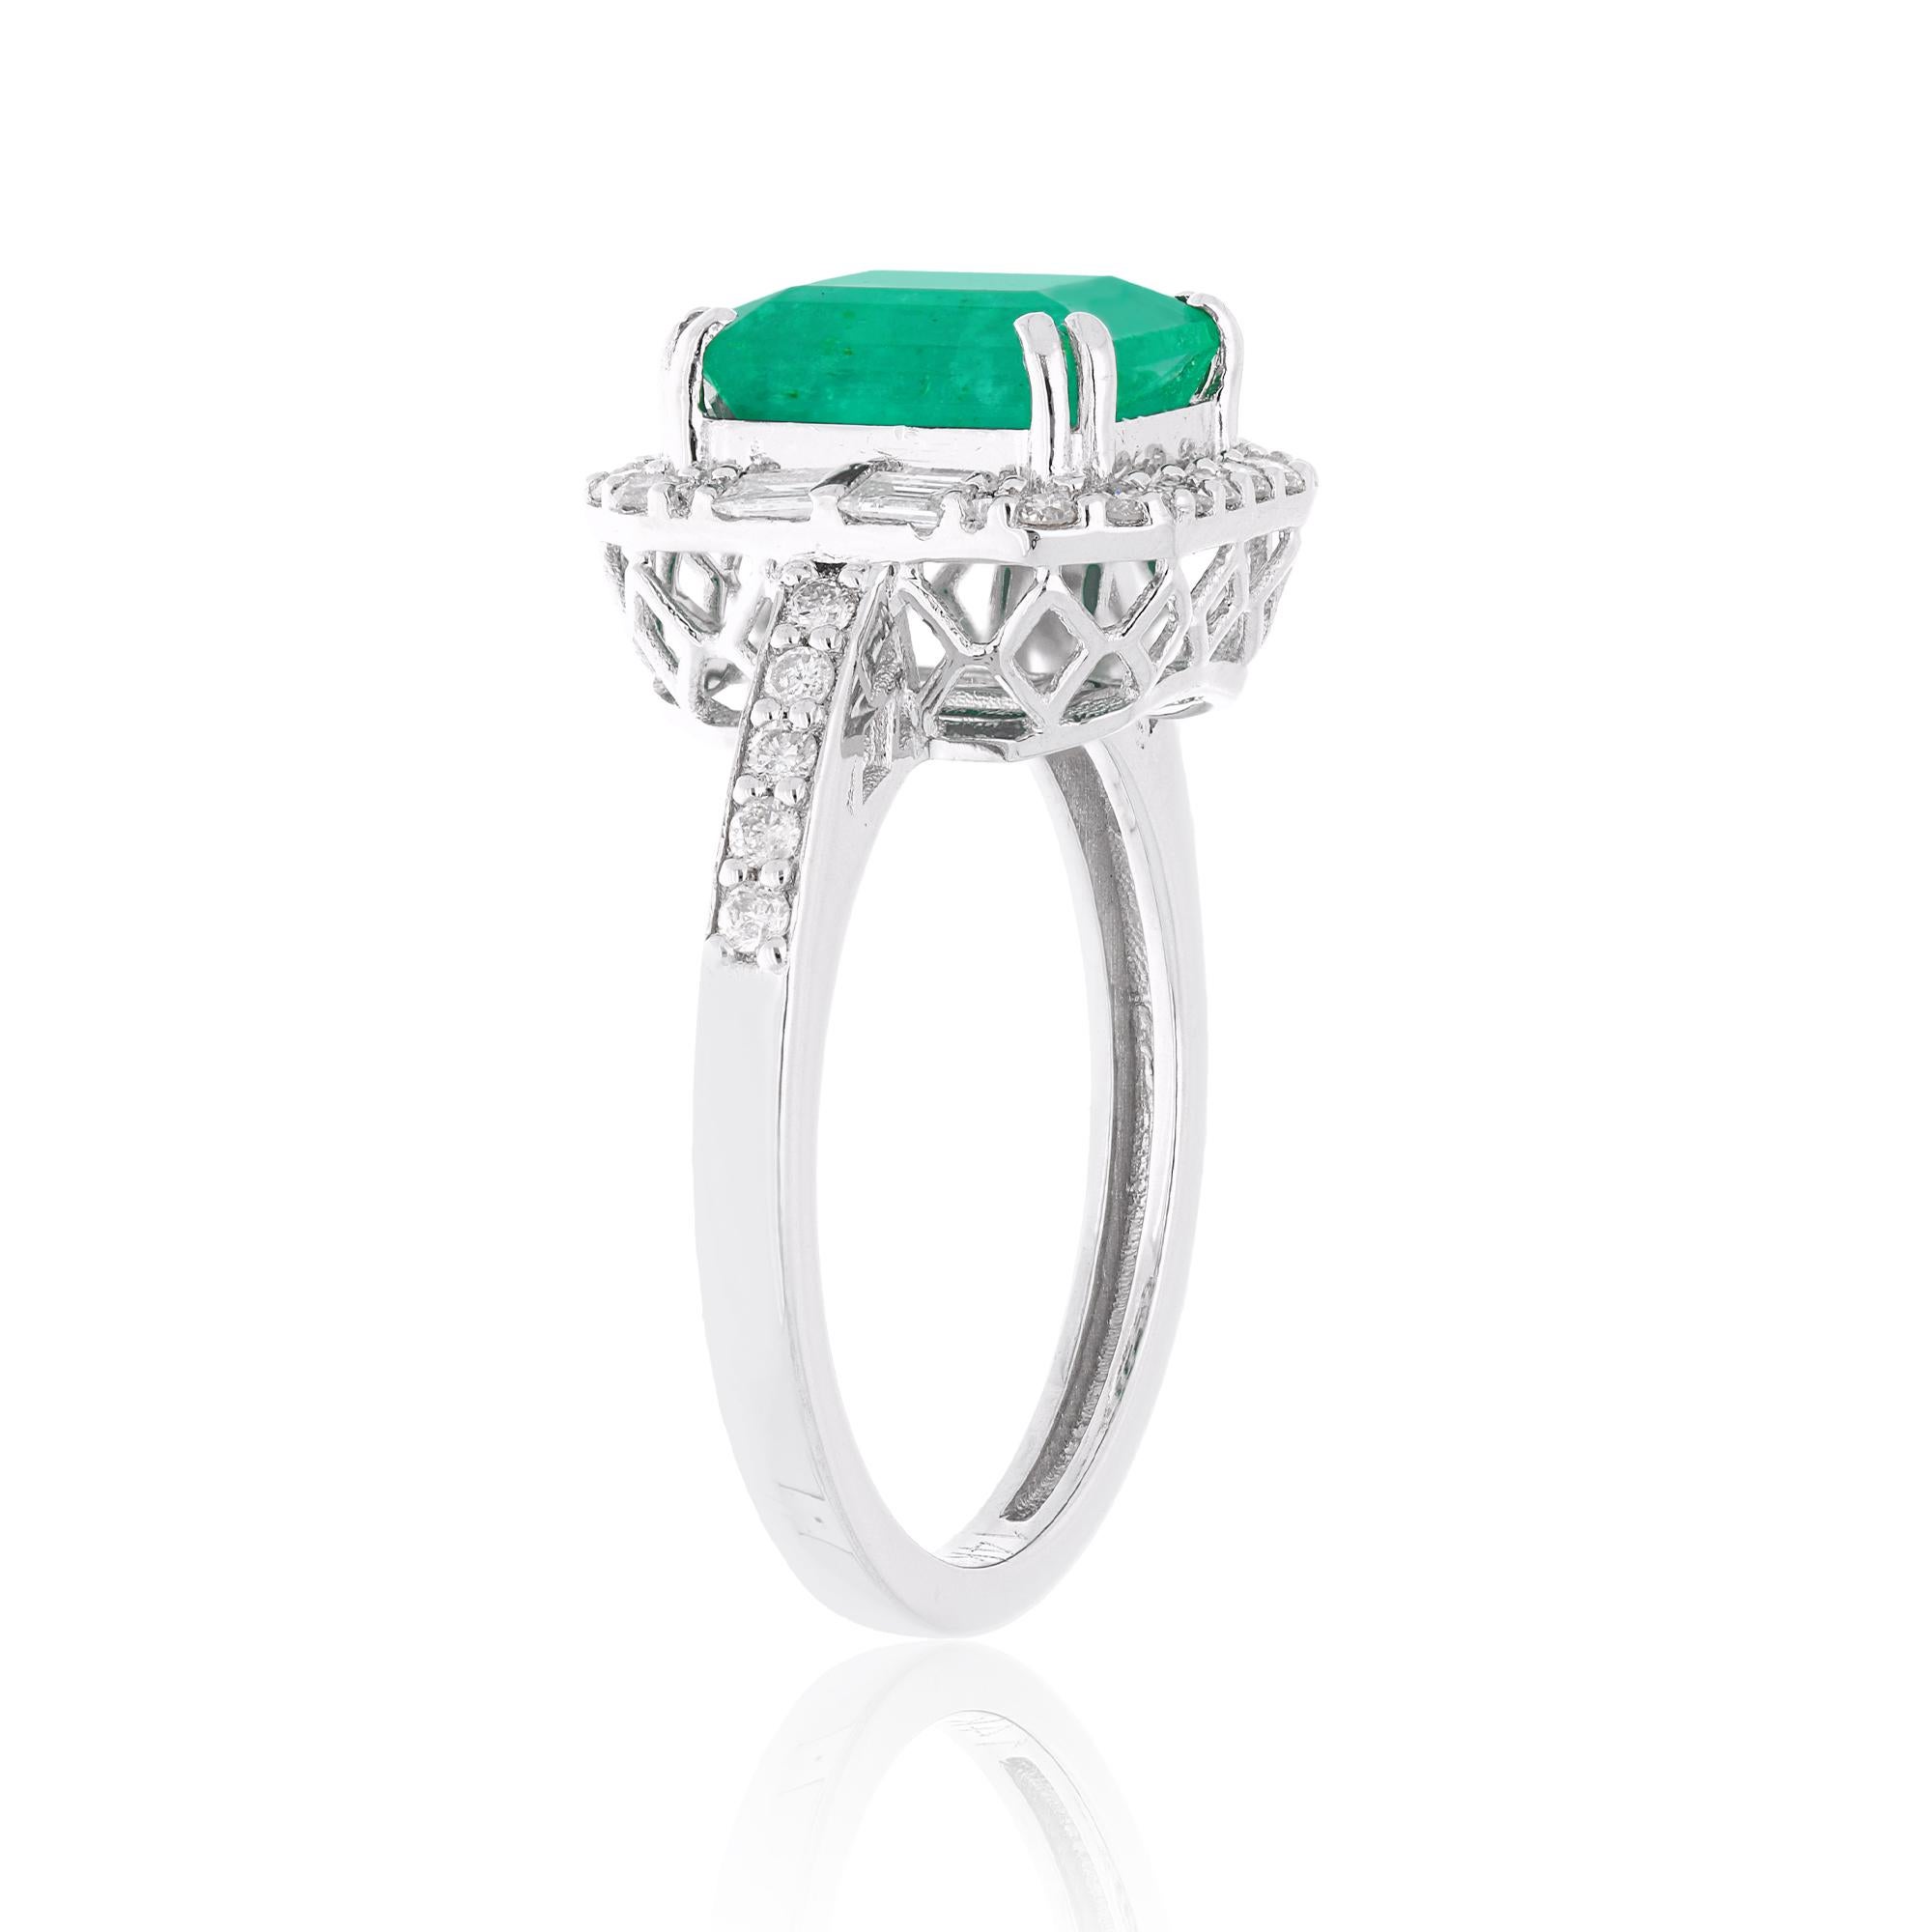 Baguette Cut Natural Emerald Gemstone Cocktail Ring Baguette Diamond 14k White Gold Jewelry For Sale